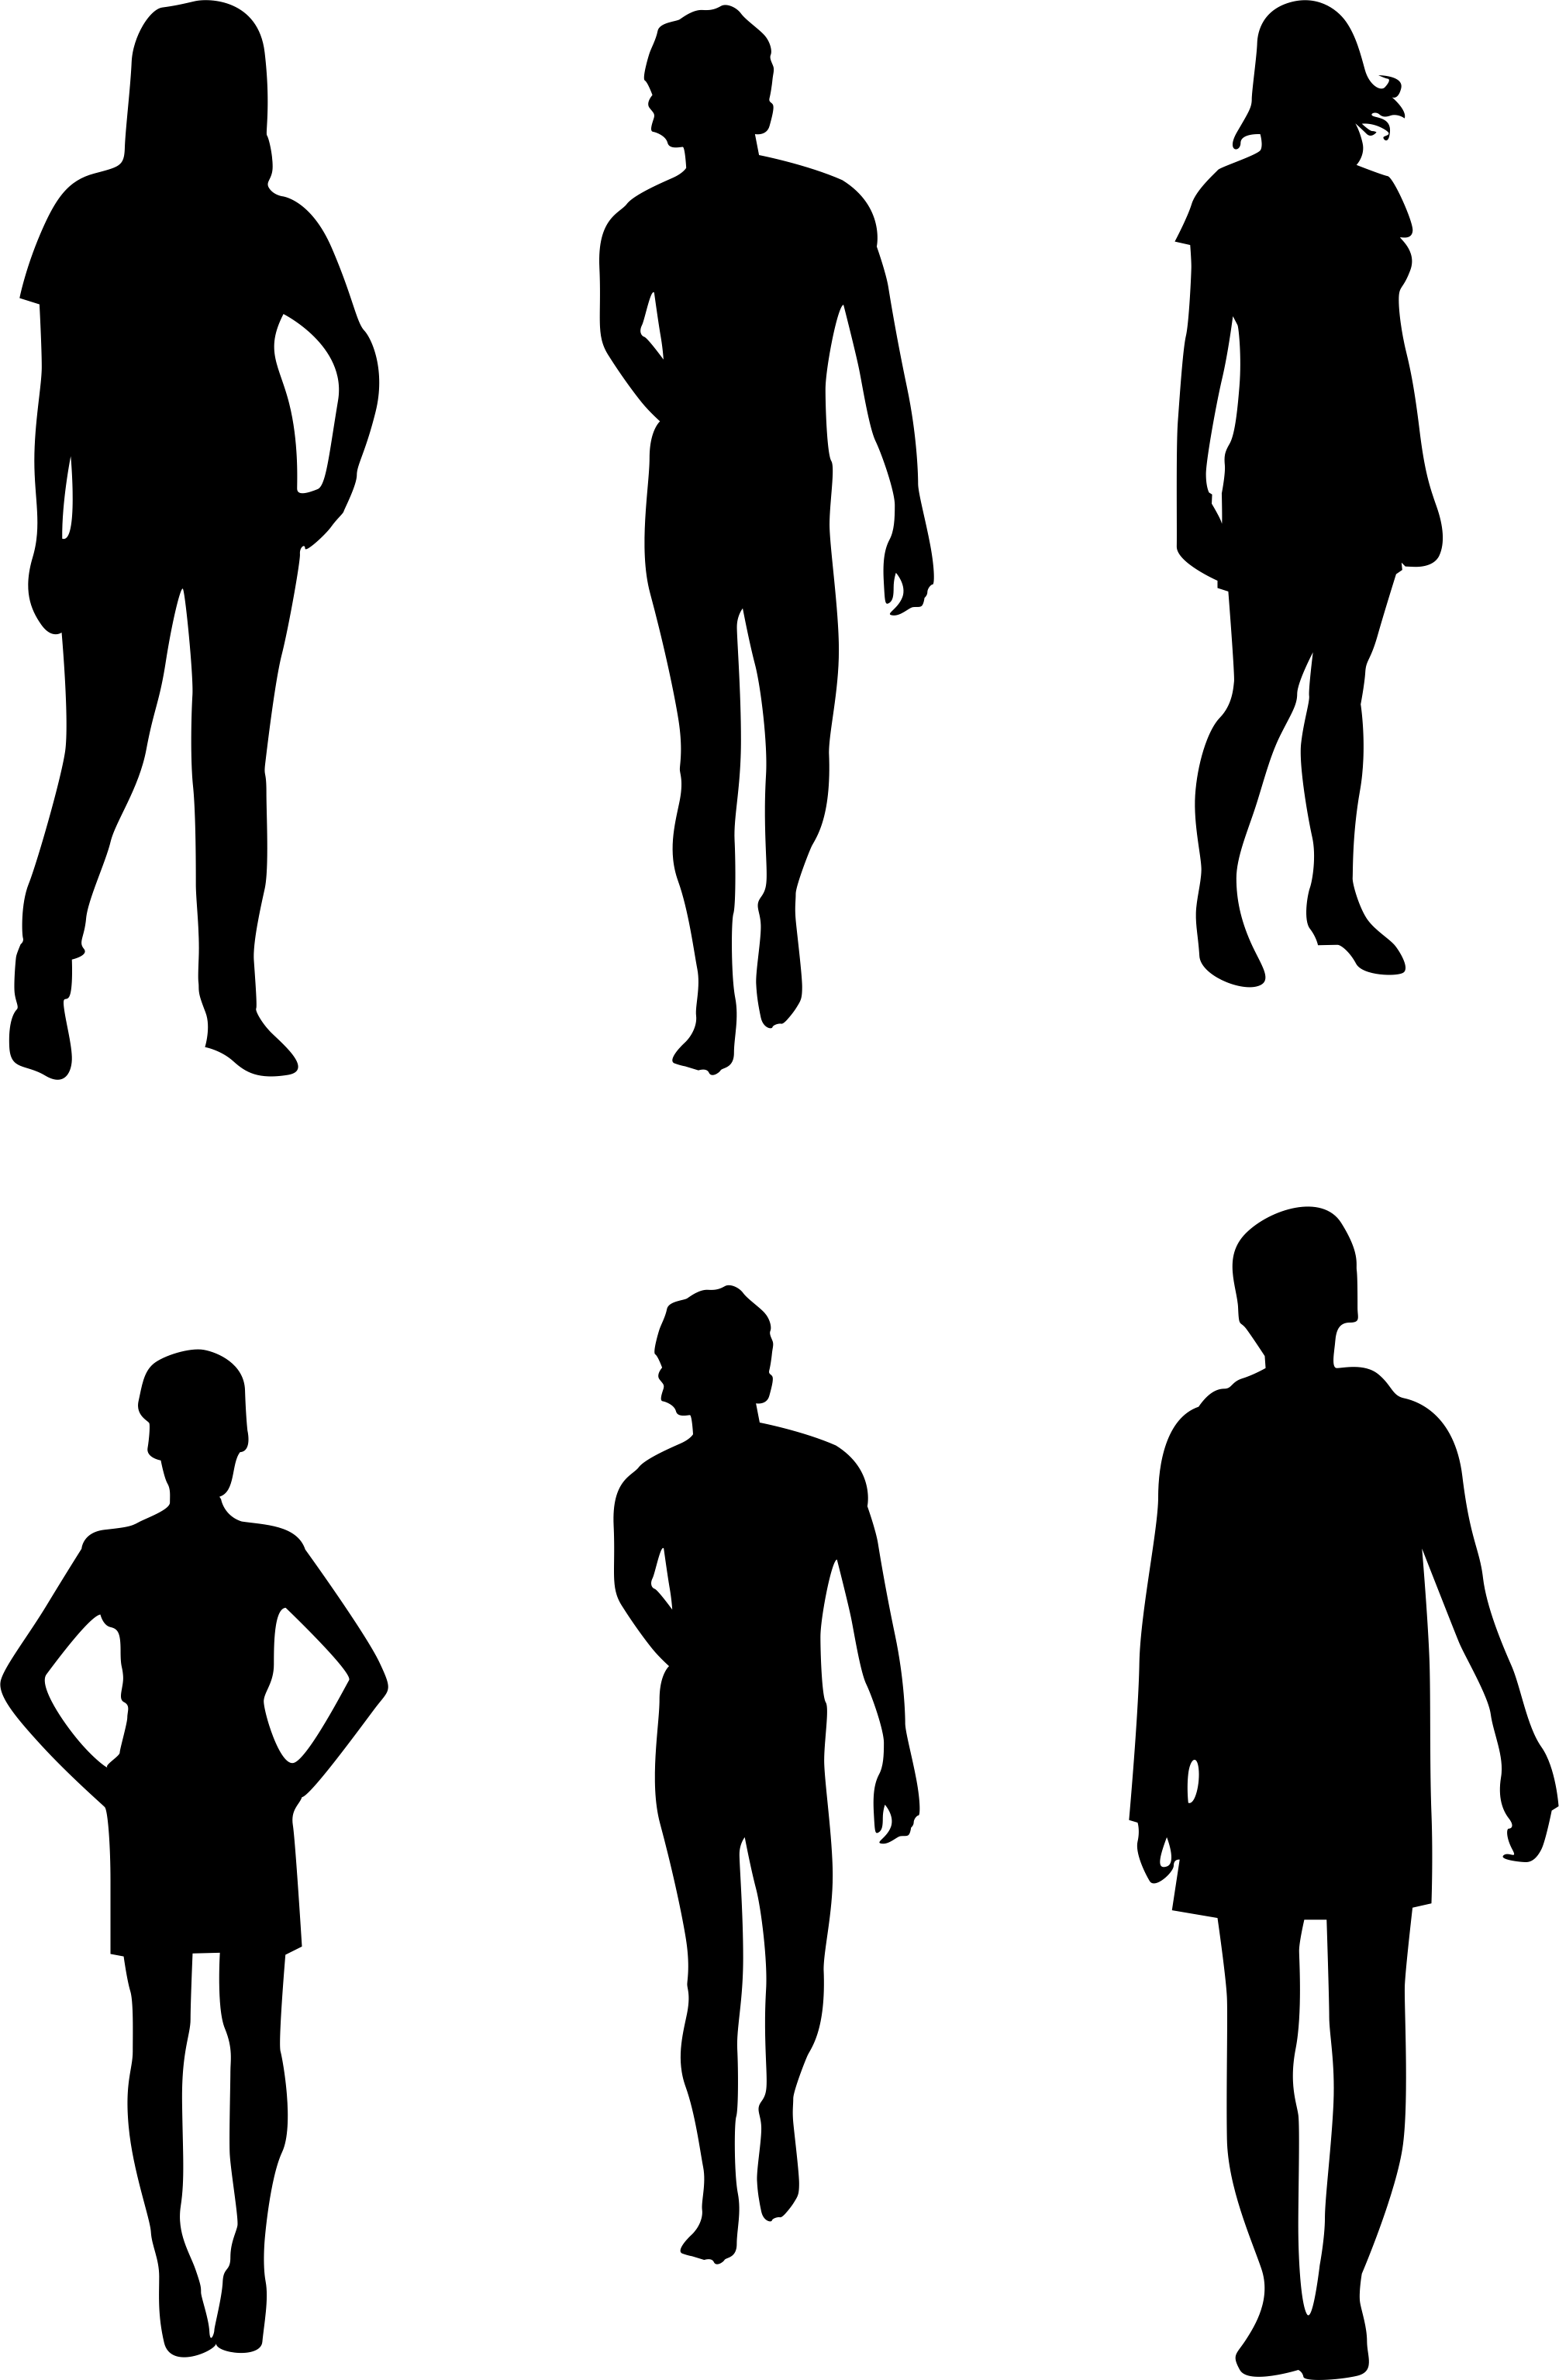 photoshop people silhouettes